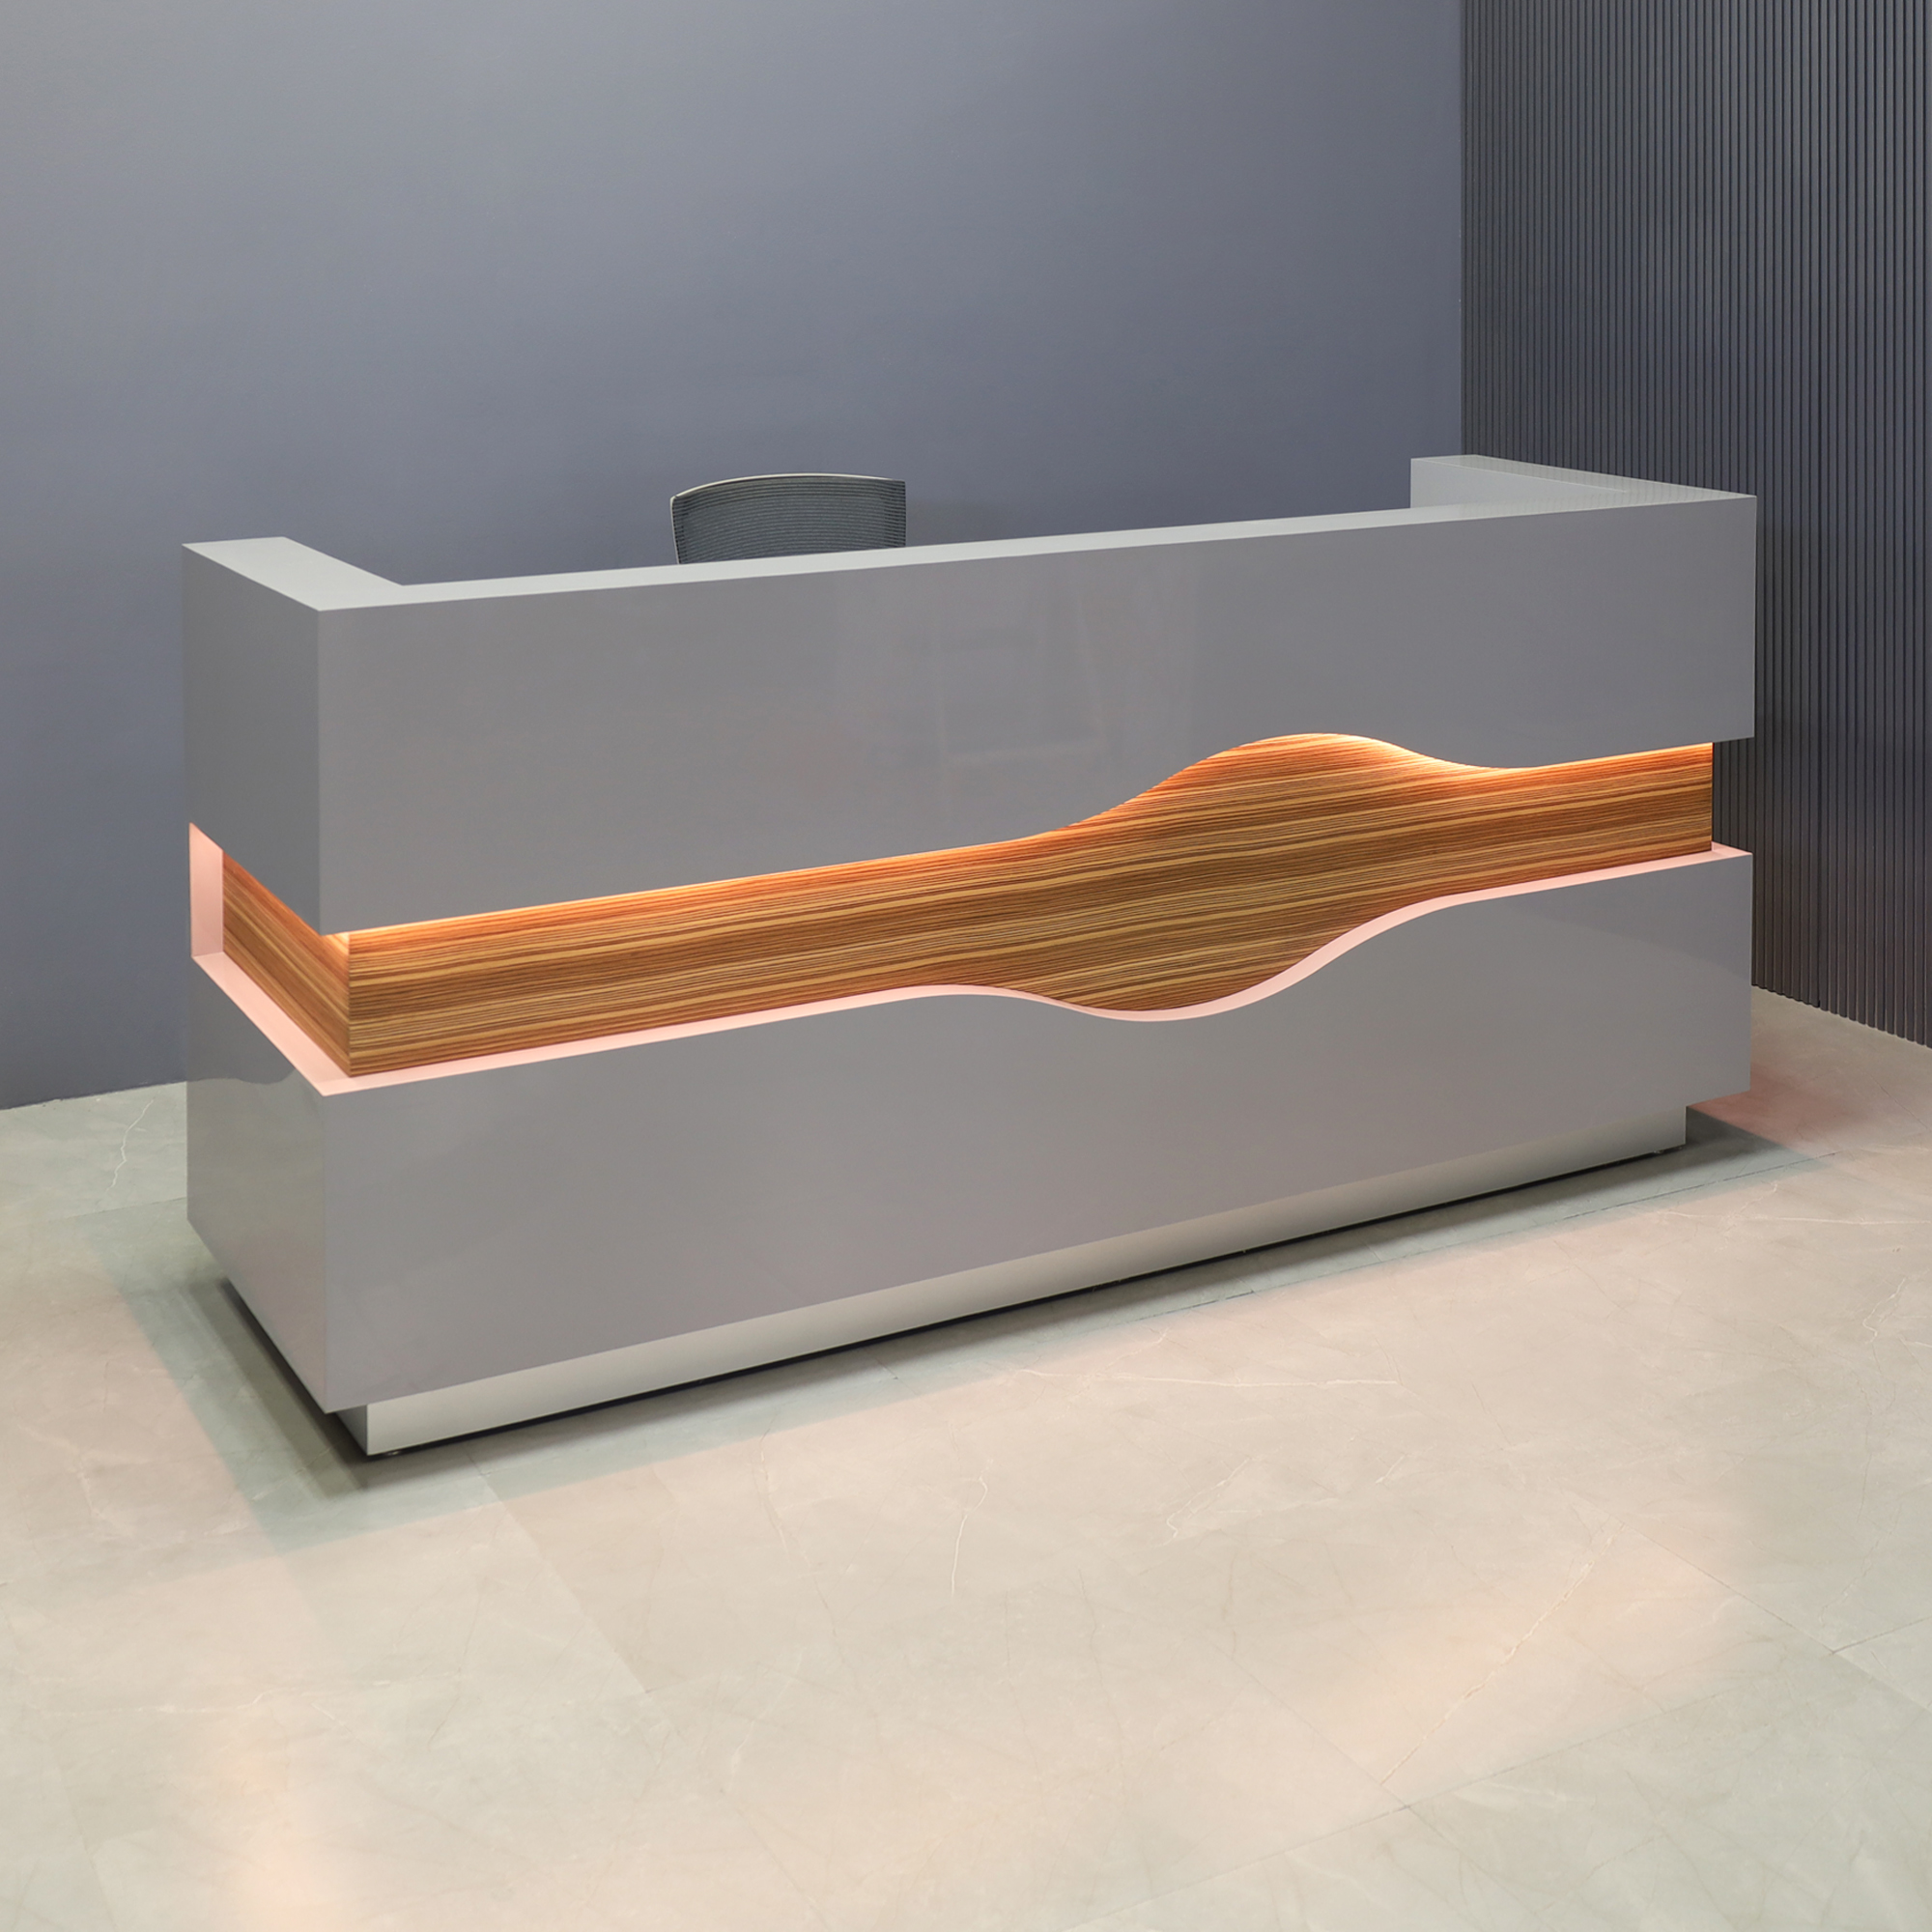 96-inch Wave Reception Desk in light gray gloss laminate desk and counter, zebrawood veneer wave accent front and brushed aluminum toe-kick, with warm white LED shown here.